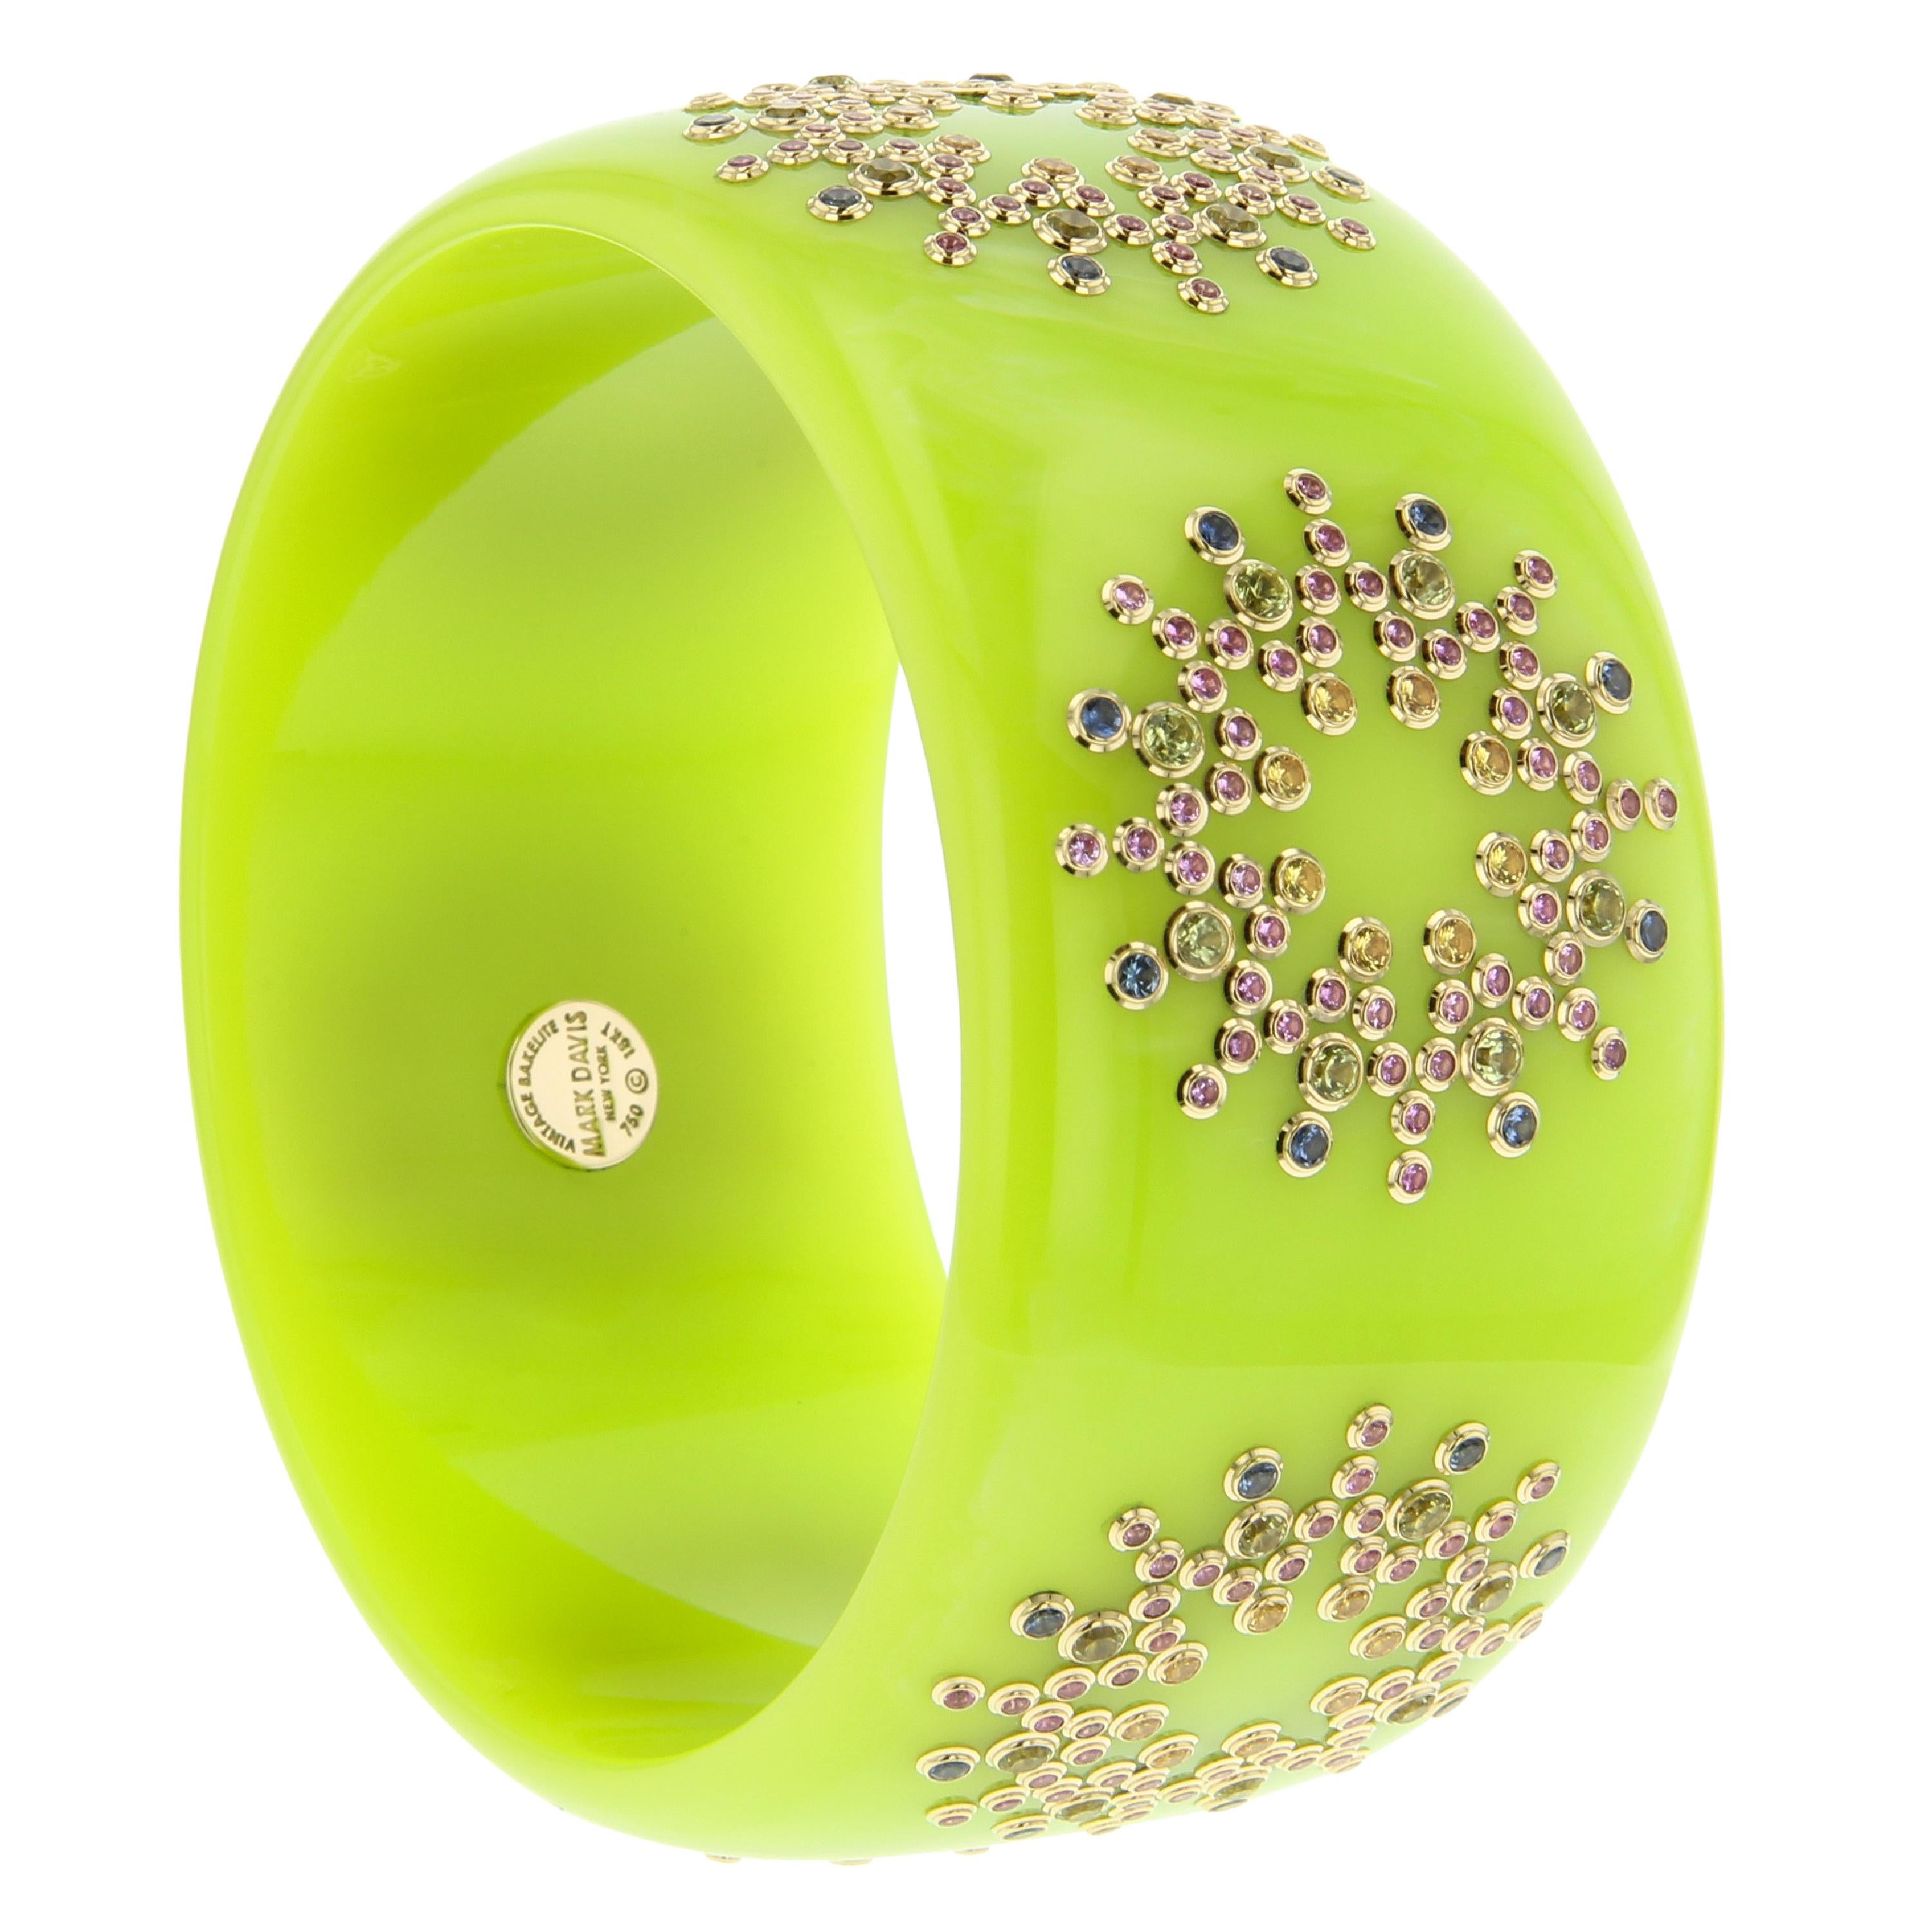 This bright and cheerful Mark Davis bangle made of vintage bakelite is a wonderful chartreuse color with extremely subtle marbling. Six stations around the bangle are precisely set with fine sapphires in blue, pink and yellow as well as peridot. The